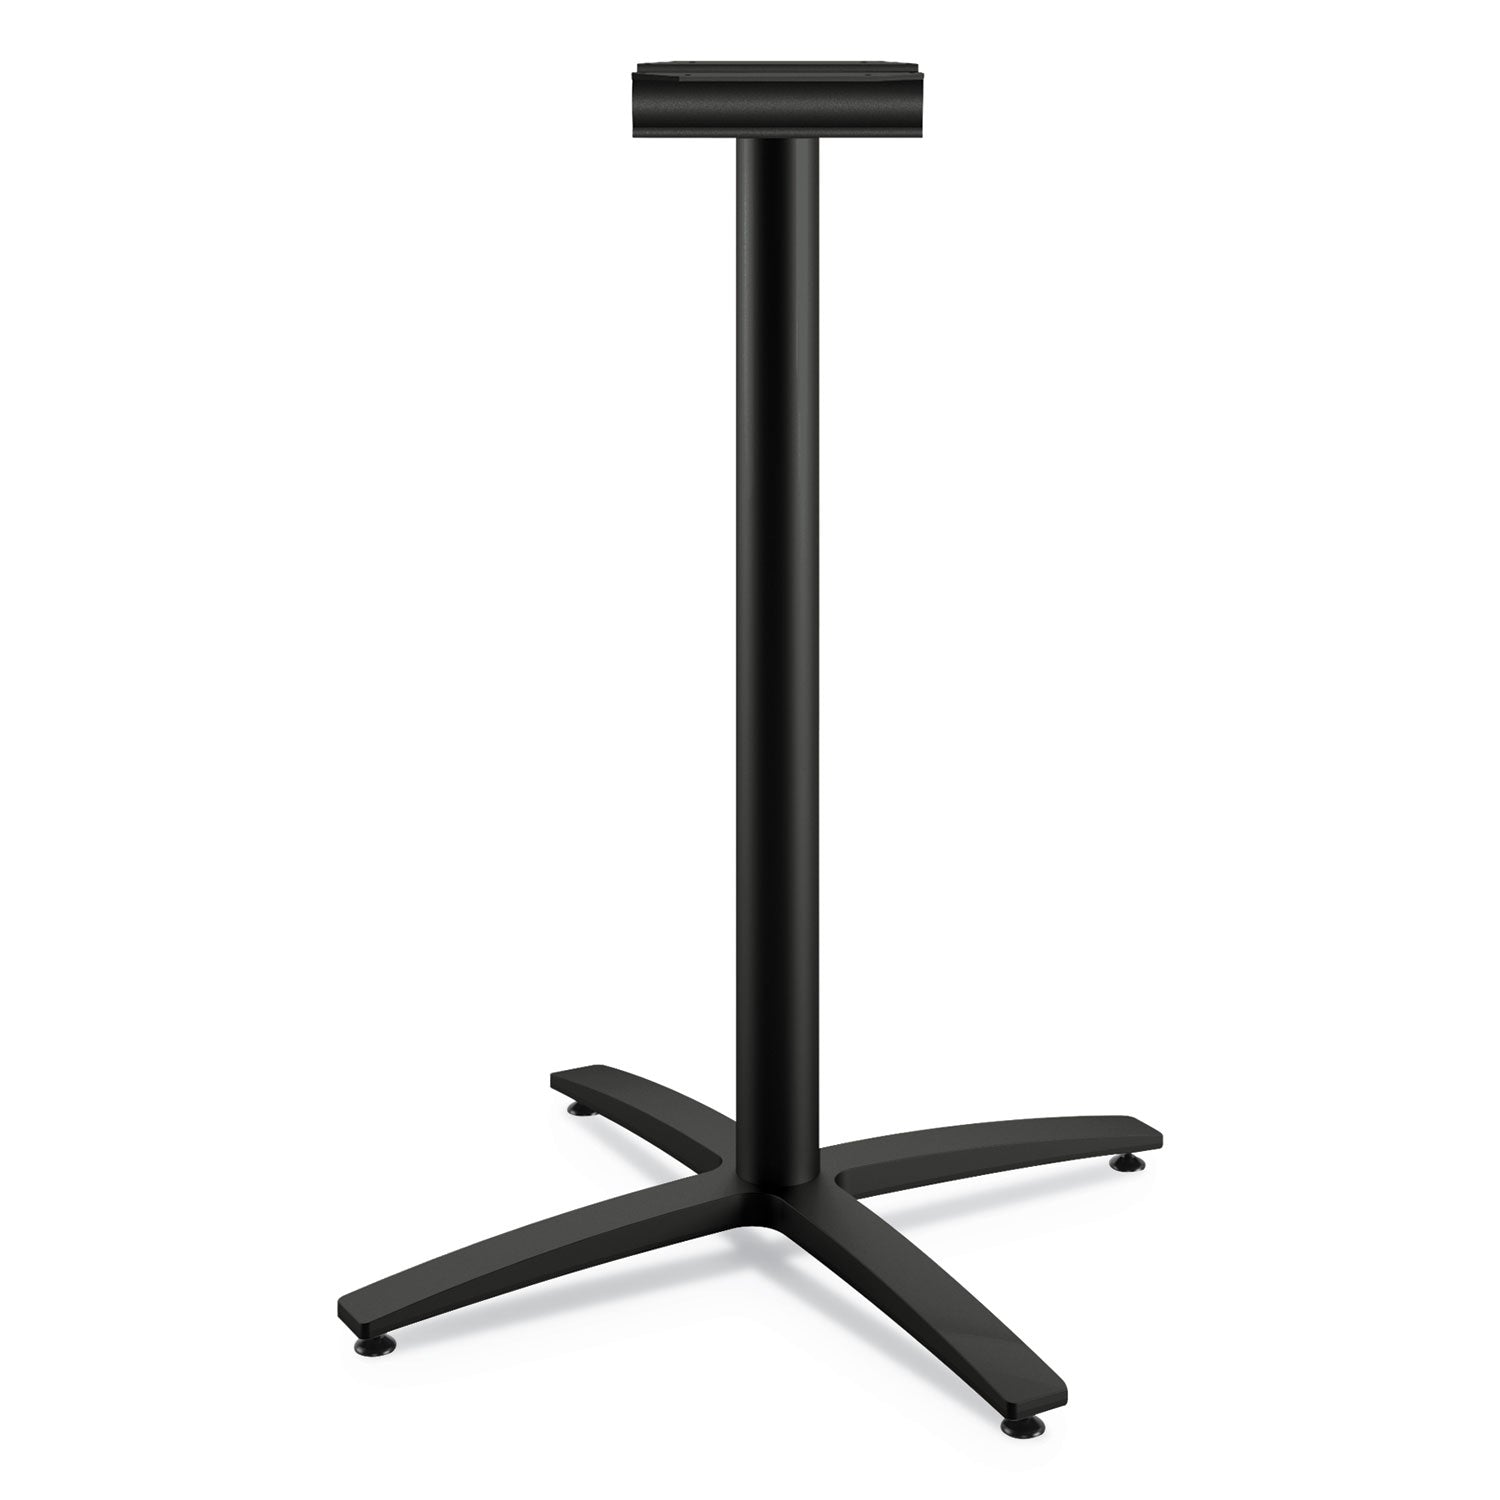 between-standing-height-x-base-for-30-to-36-table-tops-2618w-x-4112h-black_honbtx42scbk - 1